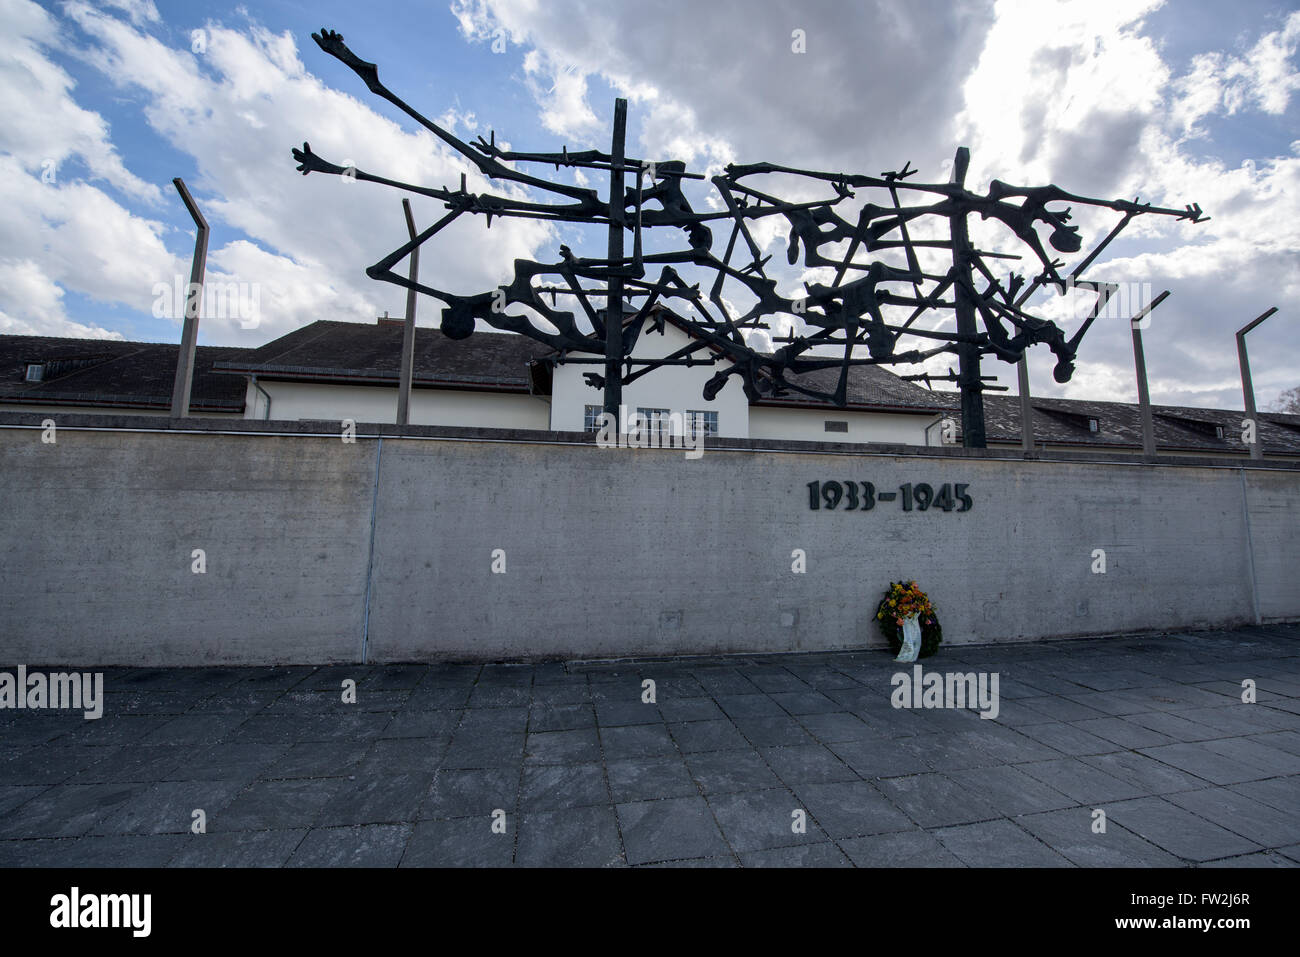 Memorial sculpture in front of the main building in Dachau concentration camp Stock Photo